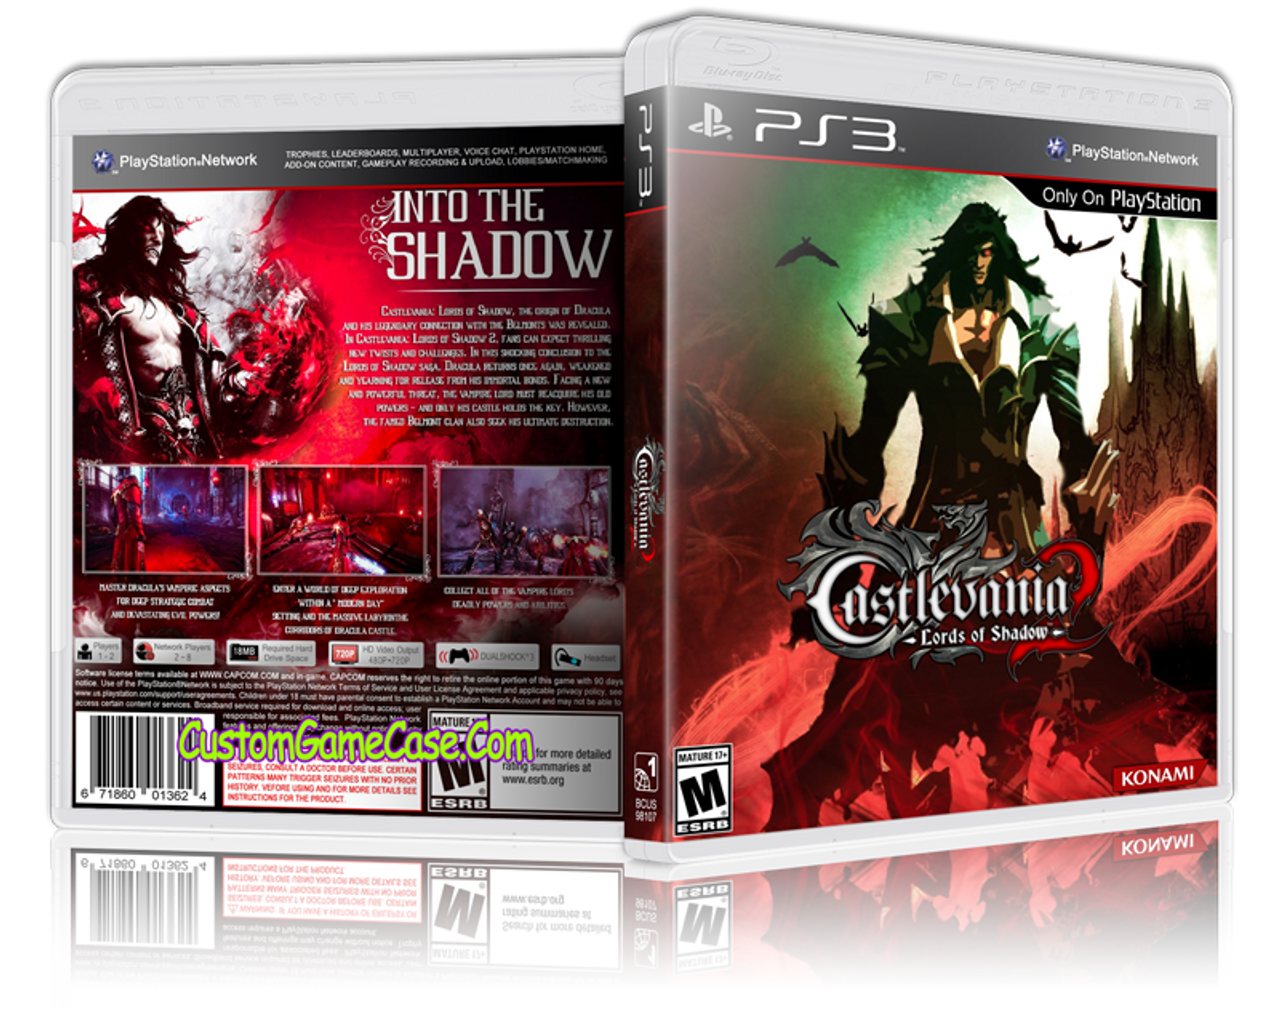 Castlevania Lords of Shadow 2 (V3) - Sony PlayStation 3 PS3